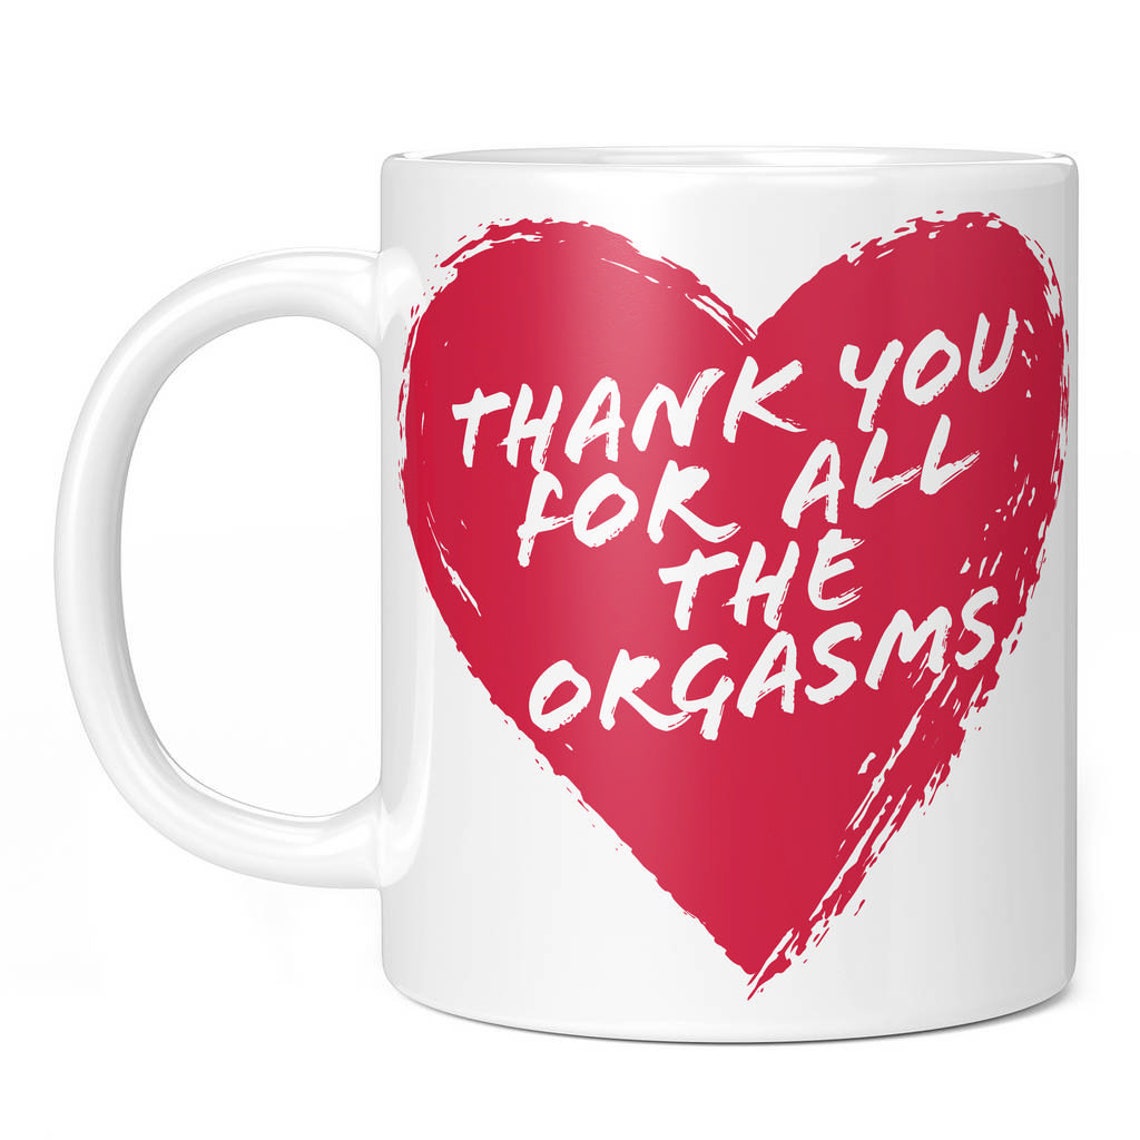 Thank You For All The Orgasms Mug Rude Sex Mugs Cup T Etsy